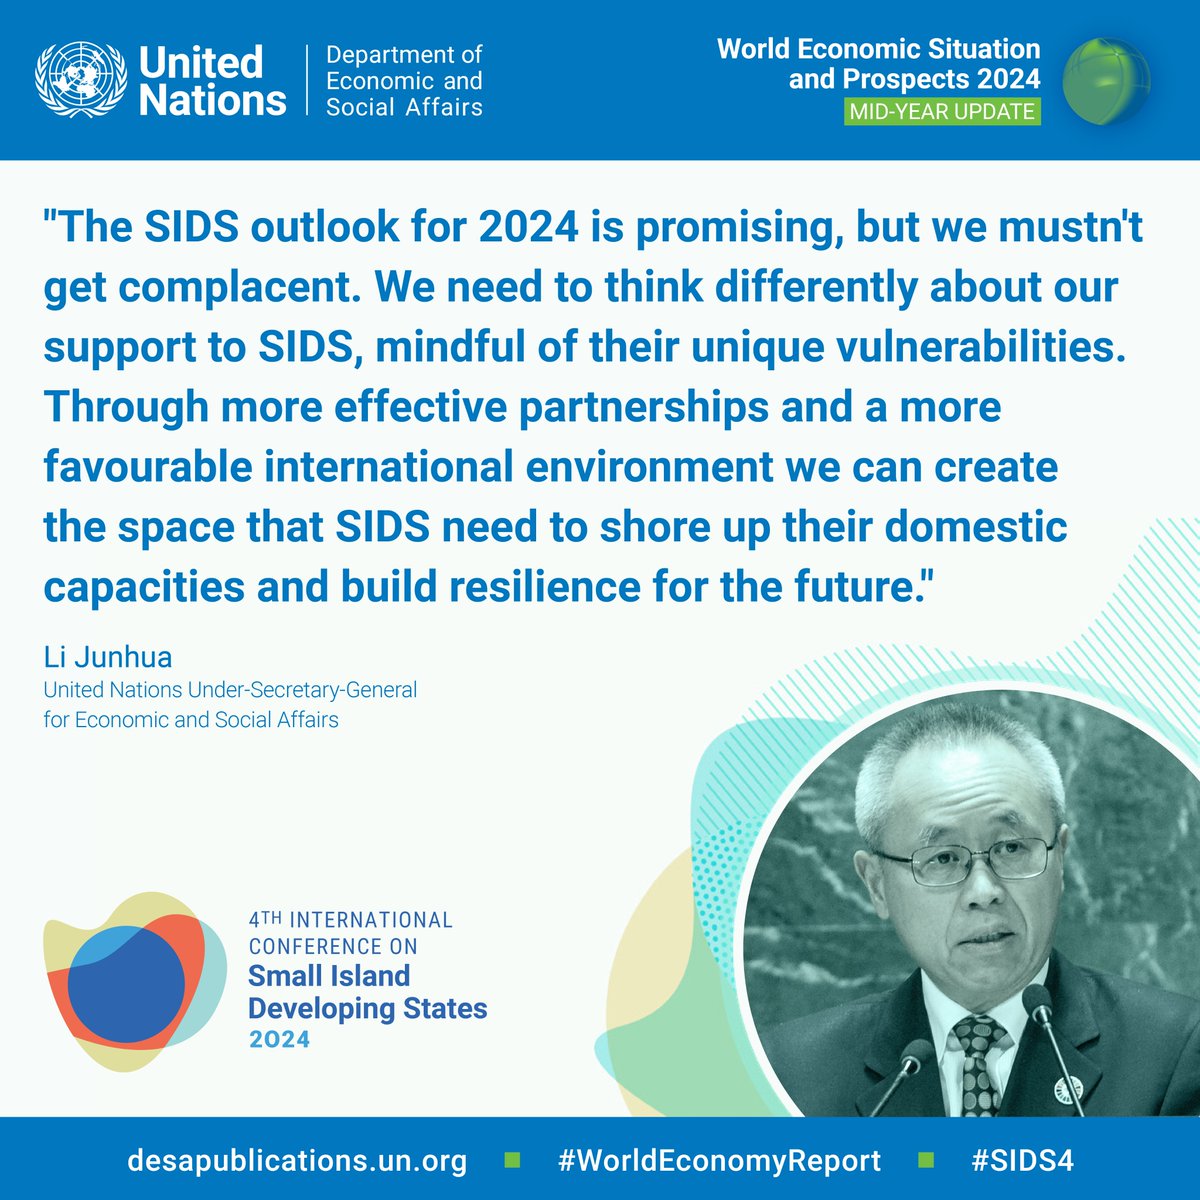 While #SIDS are bouncing back from economic shocks, we must rally our support to build their resilience for the future. Learn more from our #WorldEconomyReport mid-year update: un.org/development/de… #SmallIslands #SIDS4